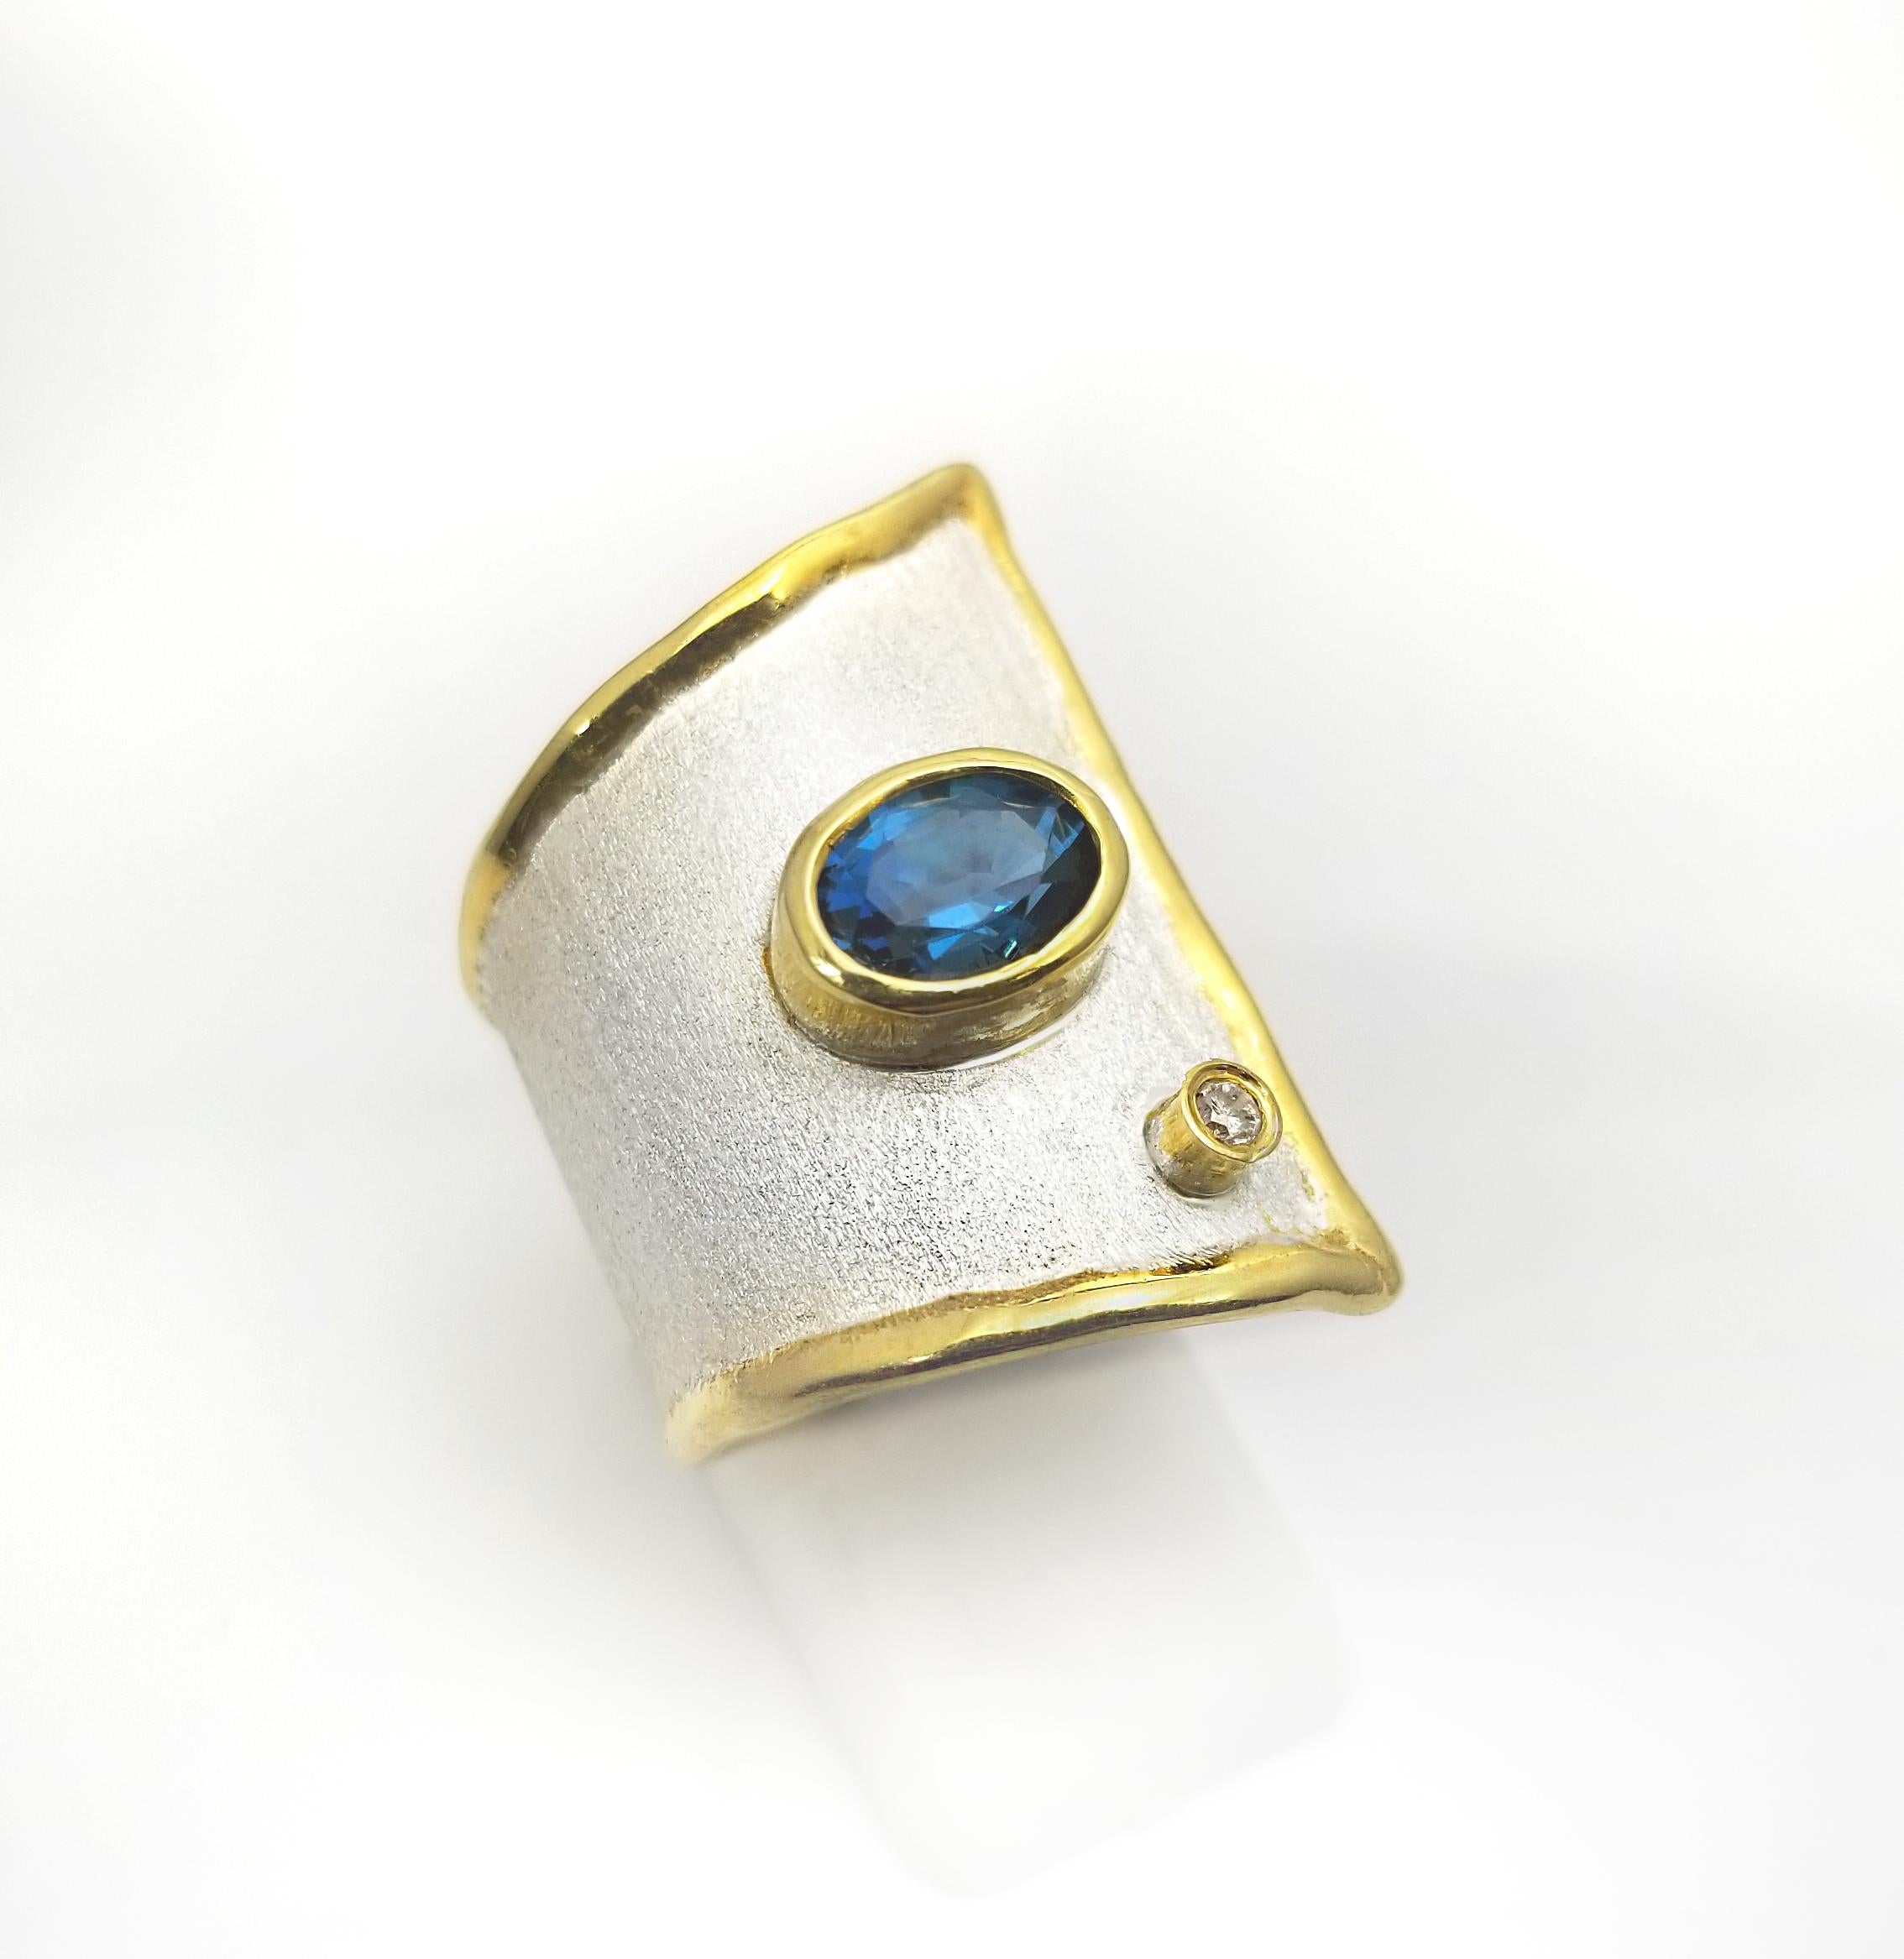 This handmade fine silver Statement Ring features a 1.60 Carat London Blue Topaz. It also has a brilliant cut diamond weighing 0.03cts.

Inspired by the geometric era, this design is the Largest one of its family. The straight lines that this ring